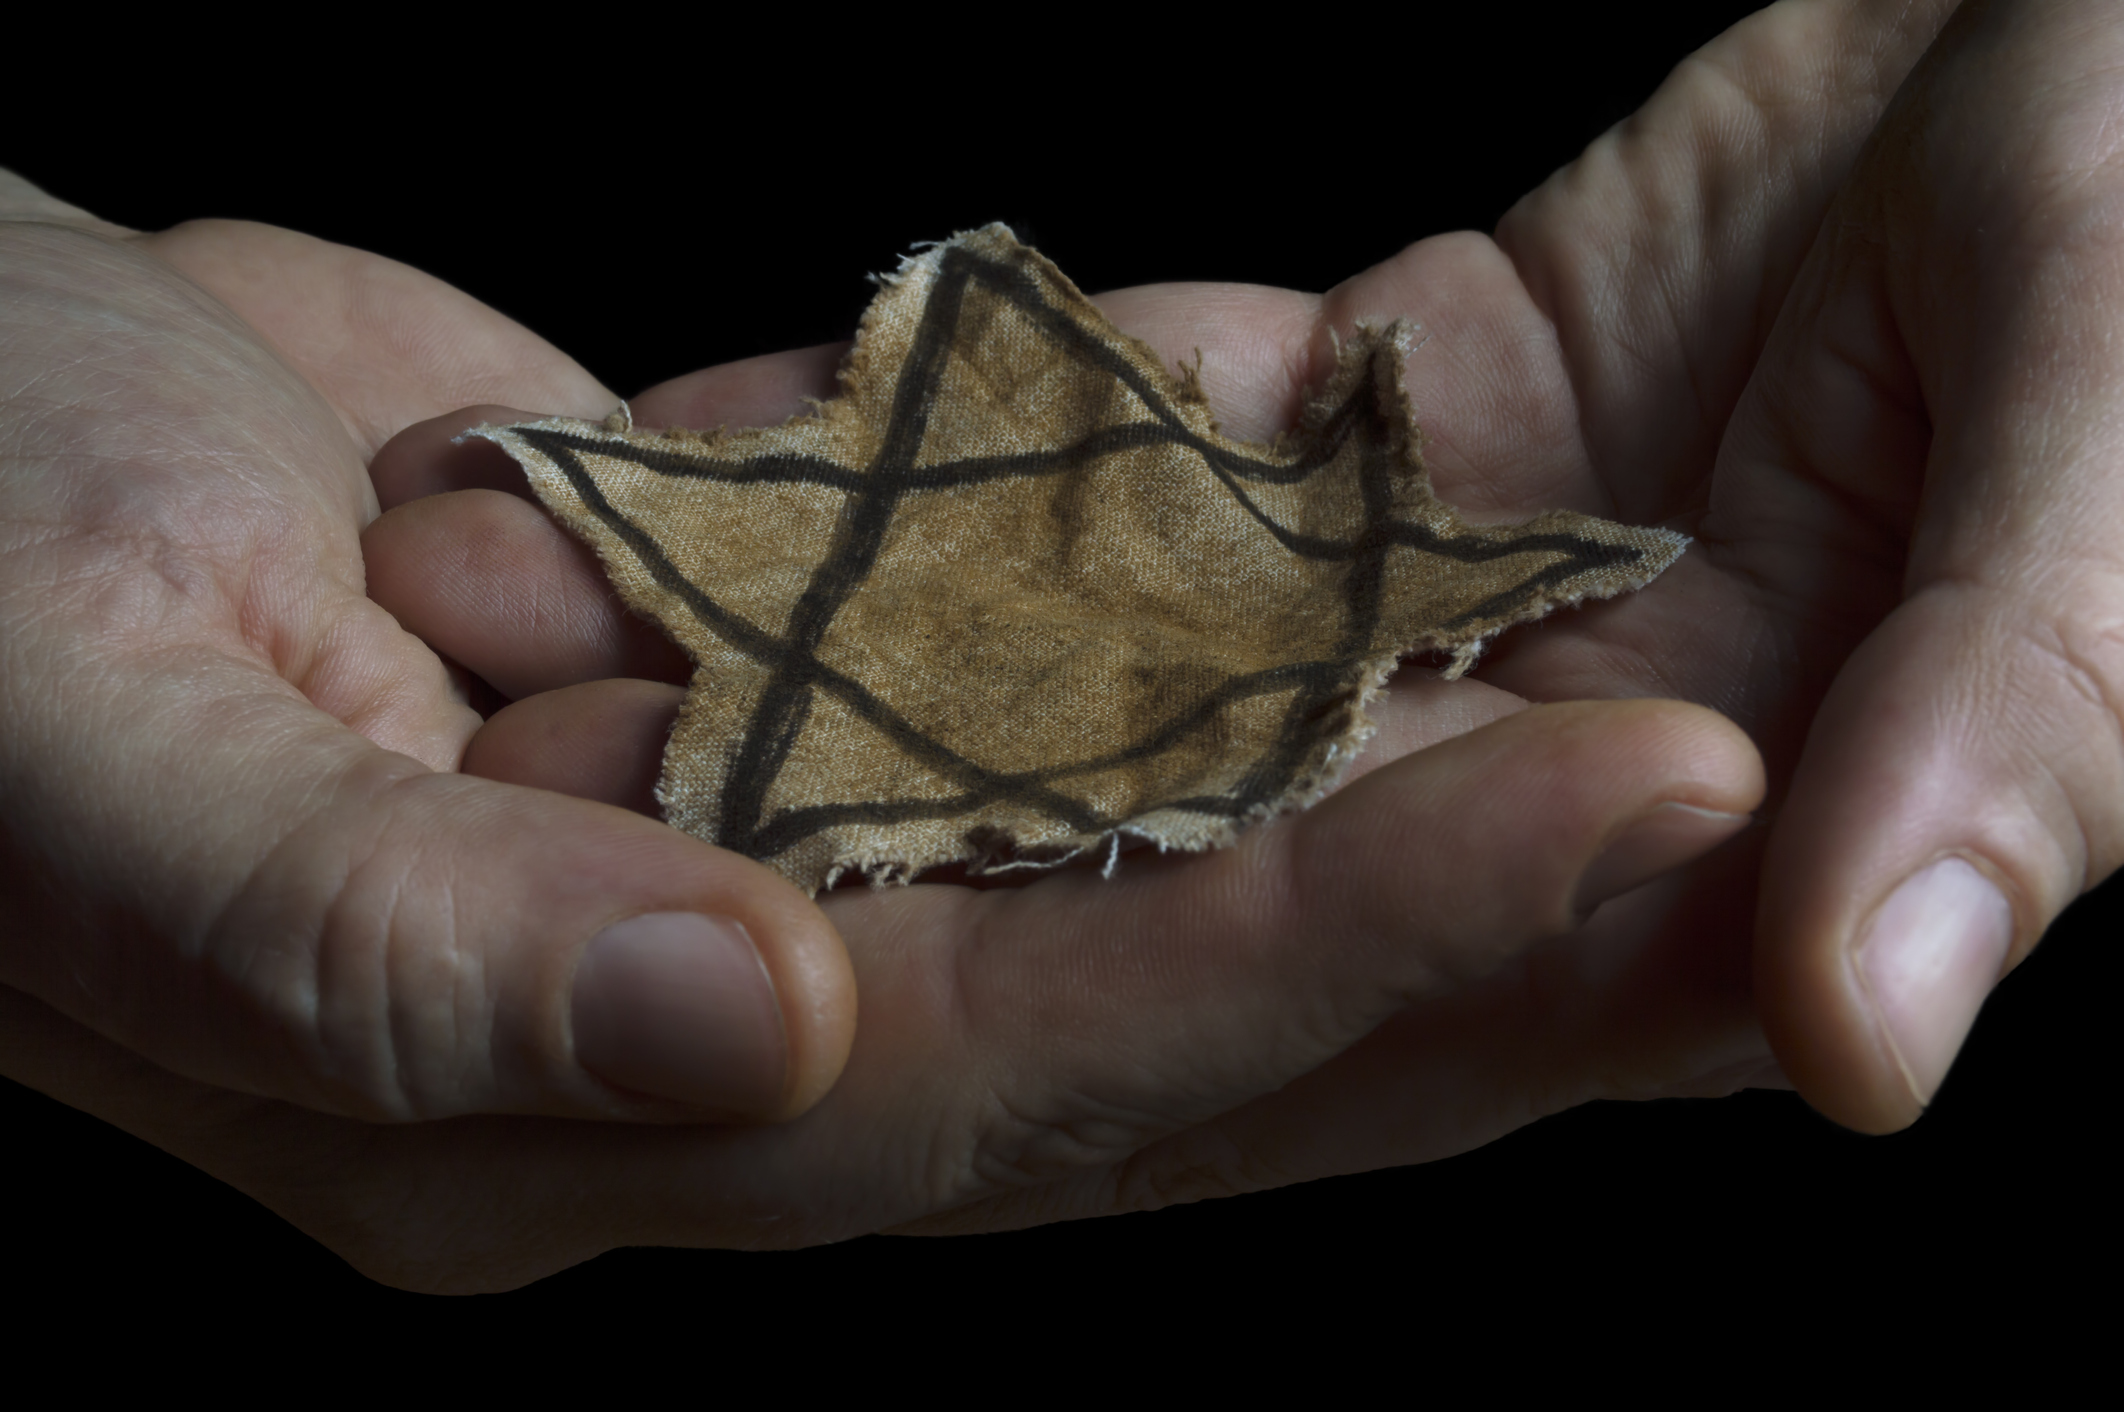 Jewish badge in the hands of a man